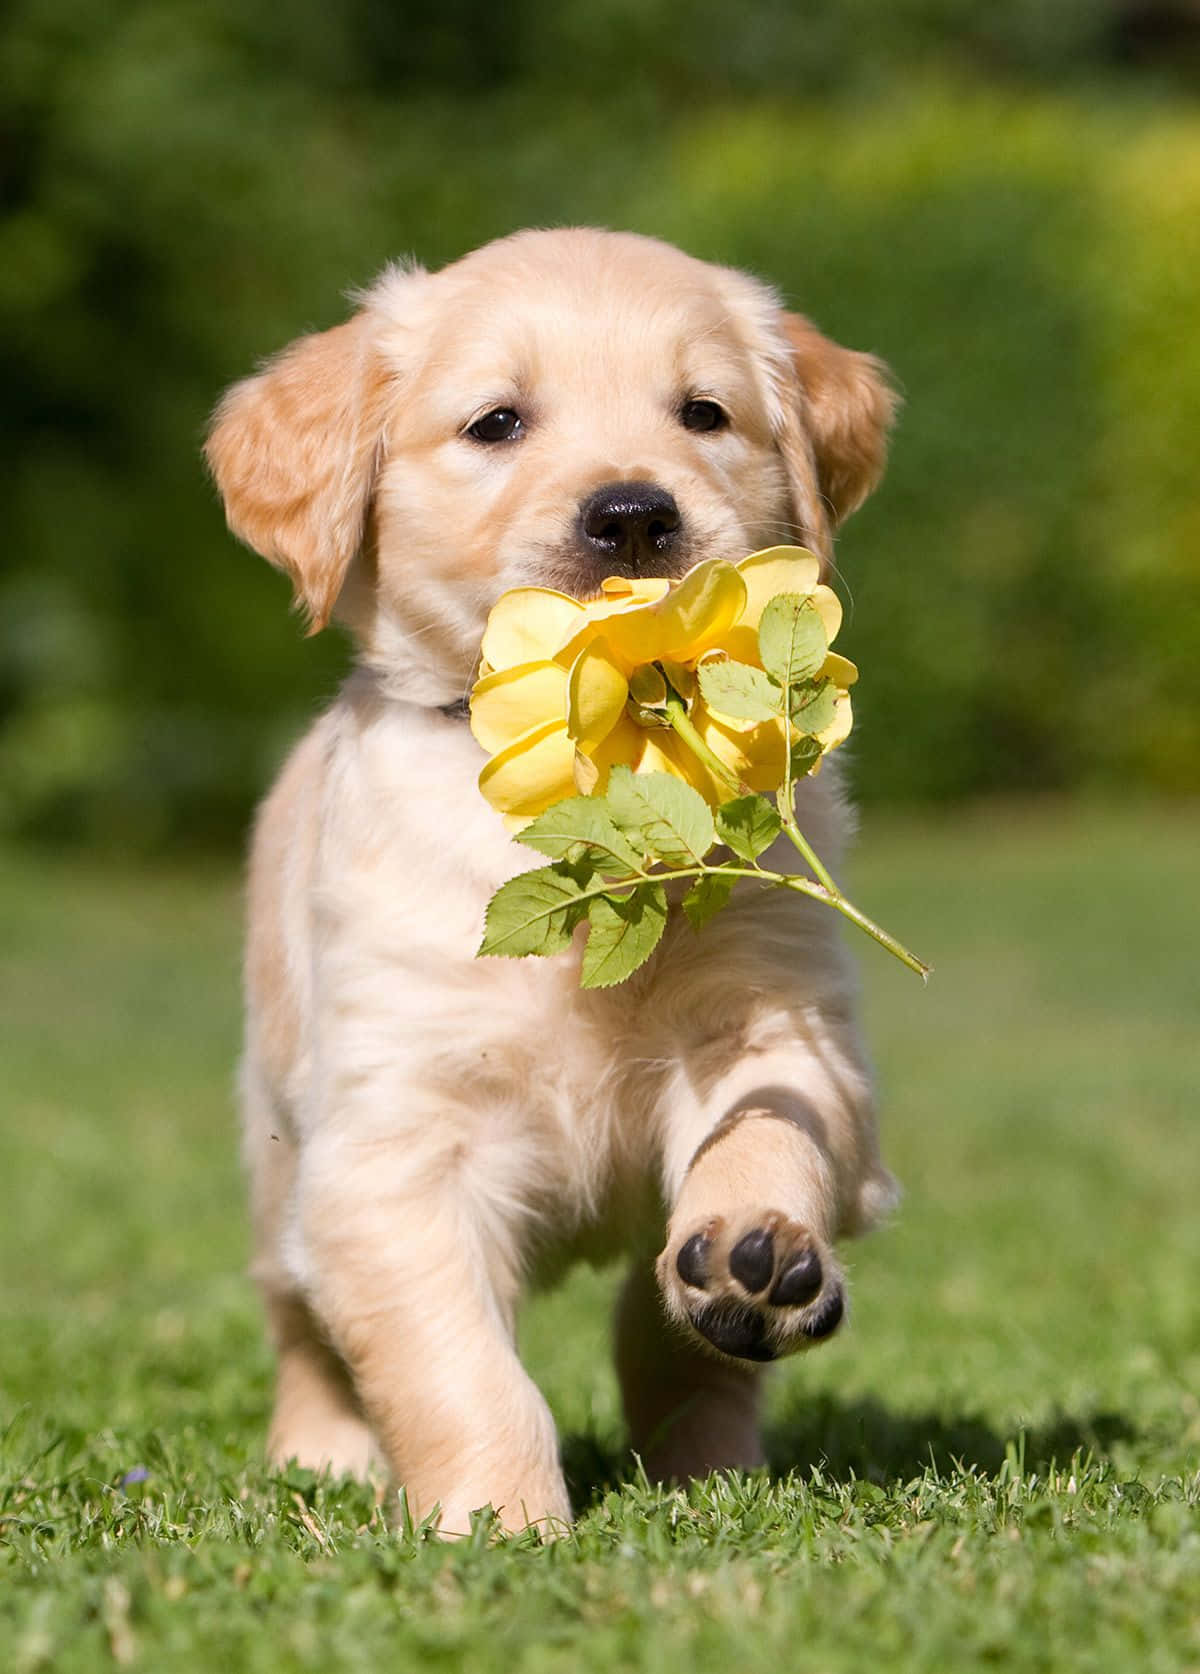 100+] Adorable Puppy Pictures | Wallpapers.com